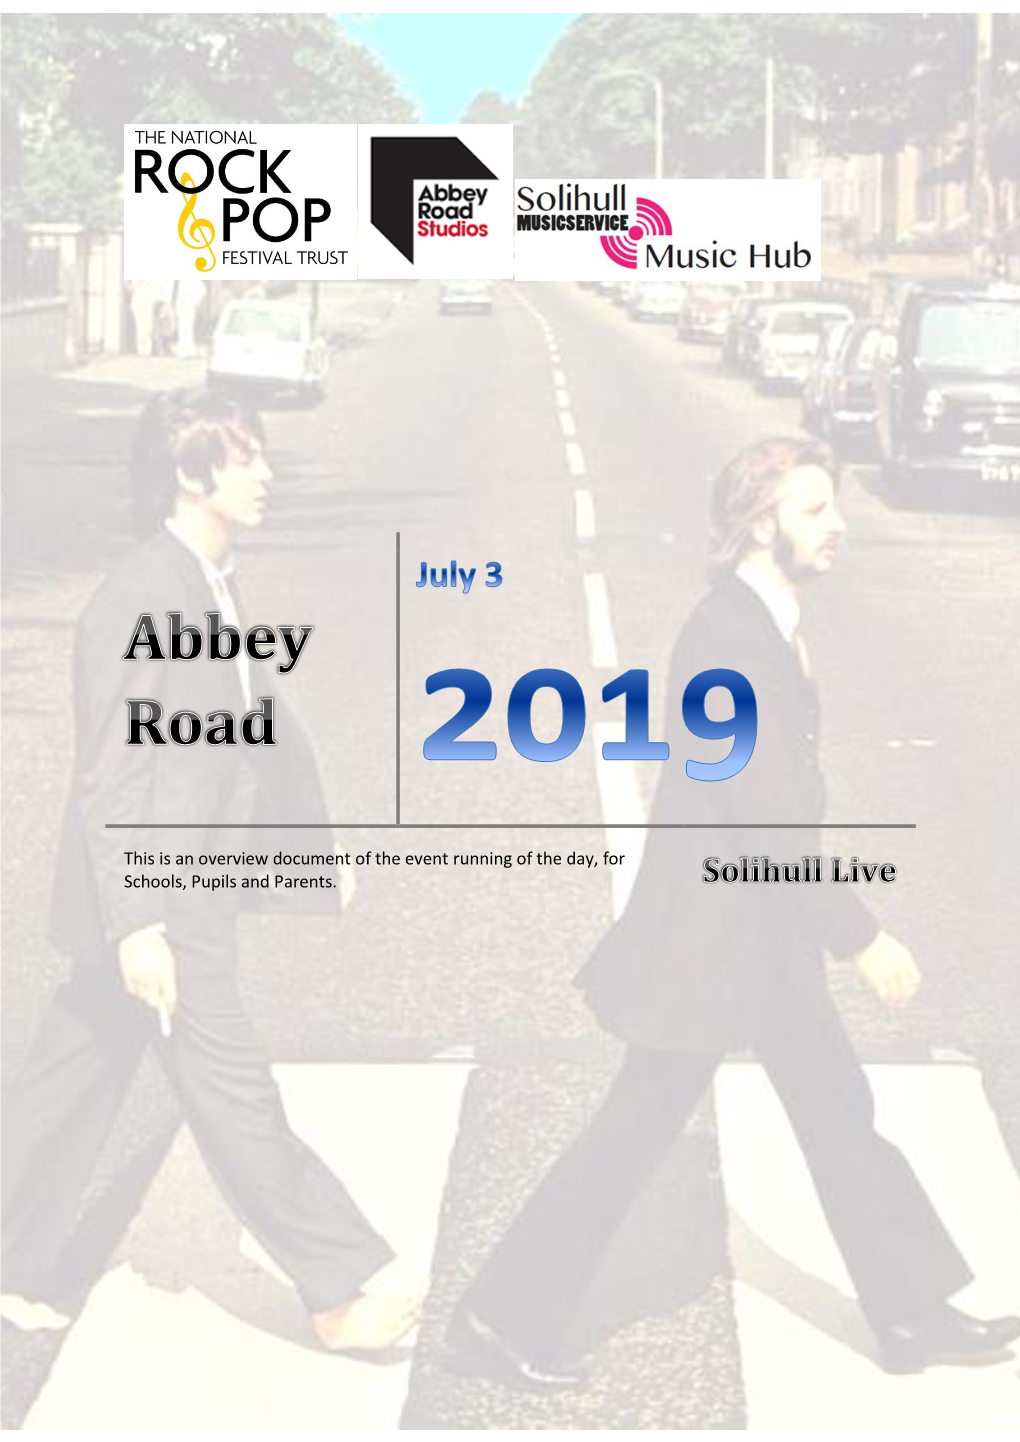 Abbey Road Will Supply Refreshments and Put on a Film About Abbey Road